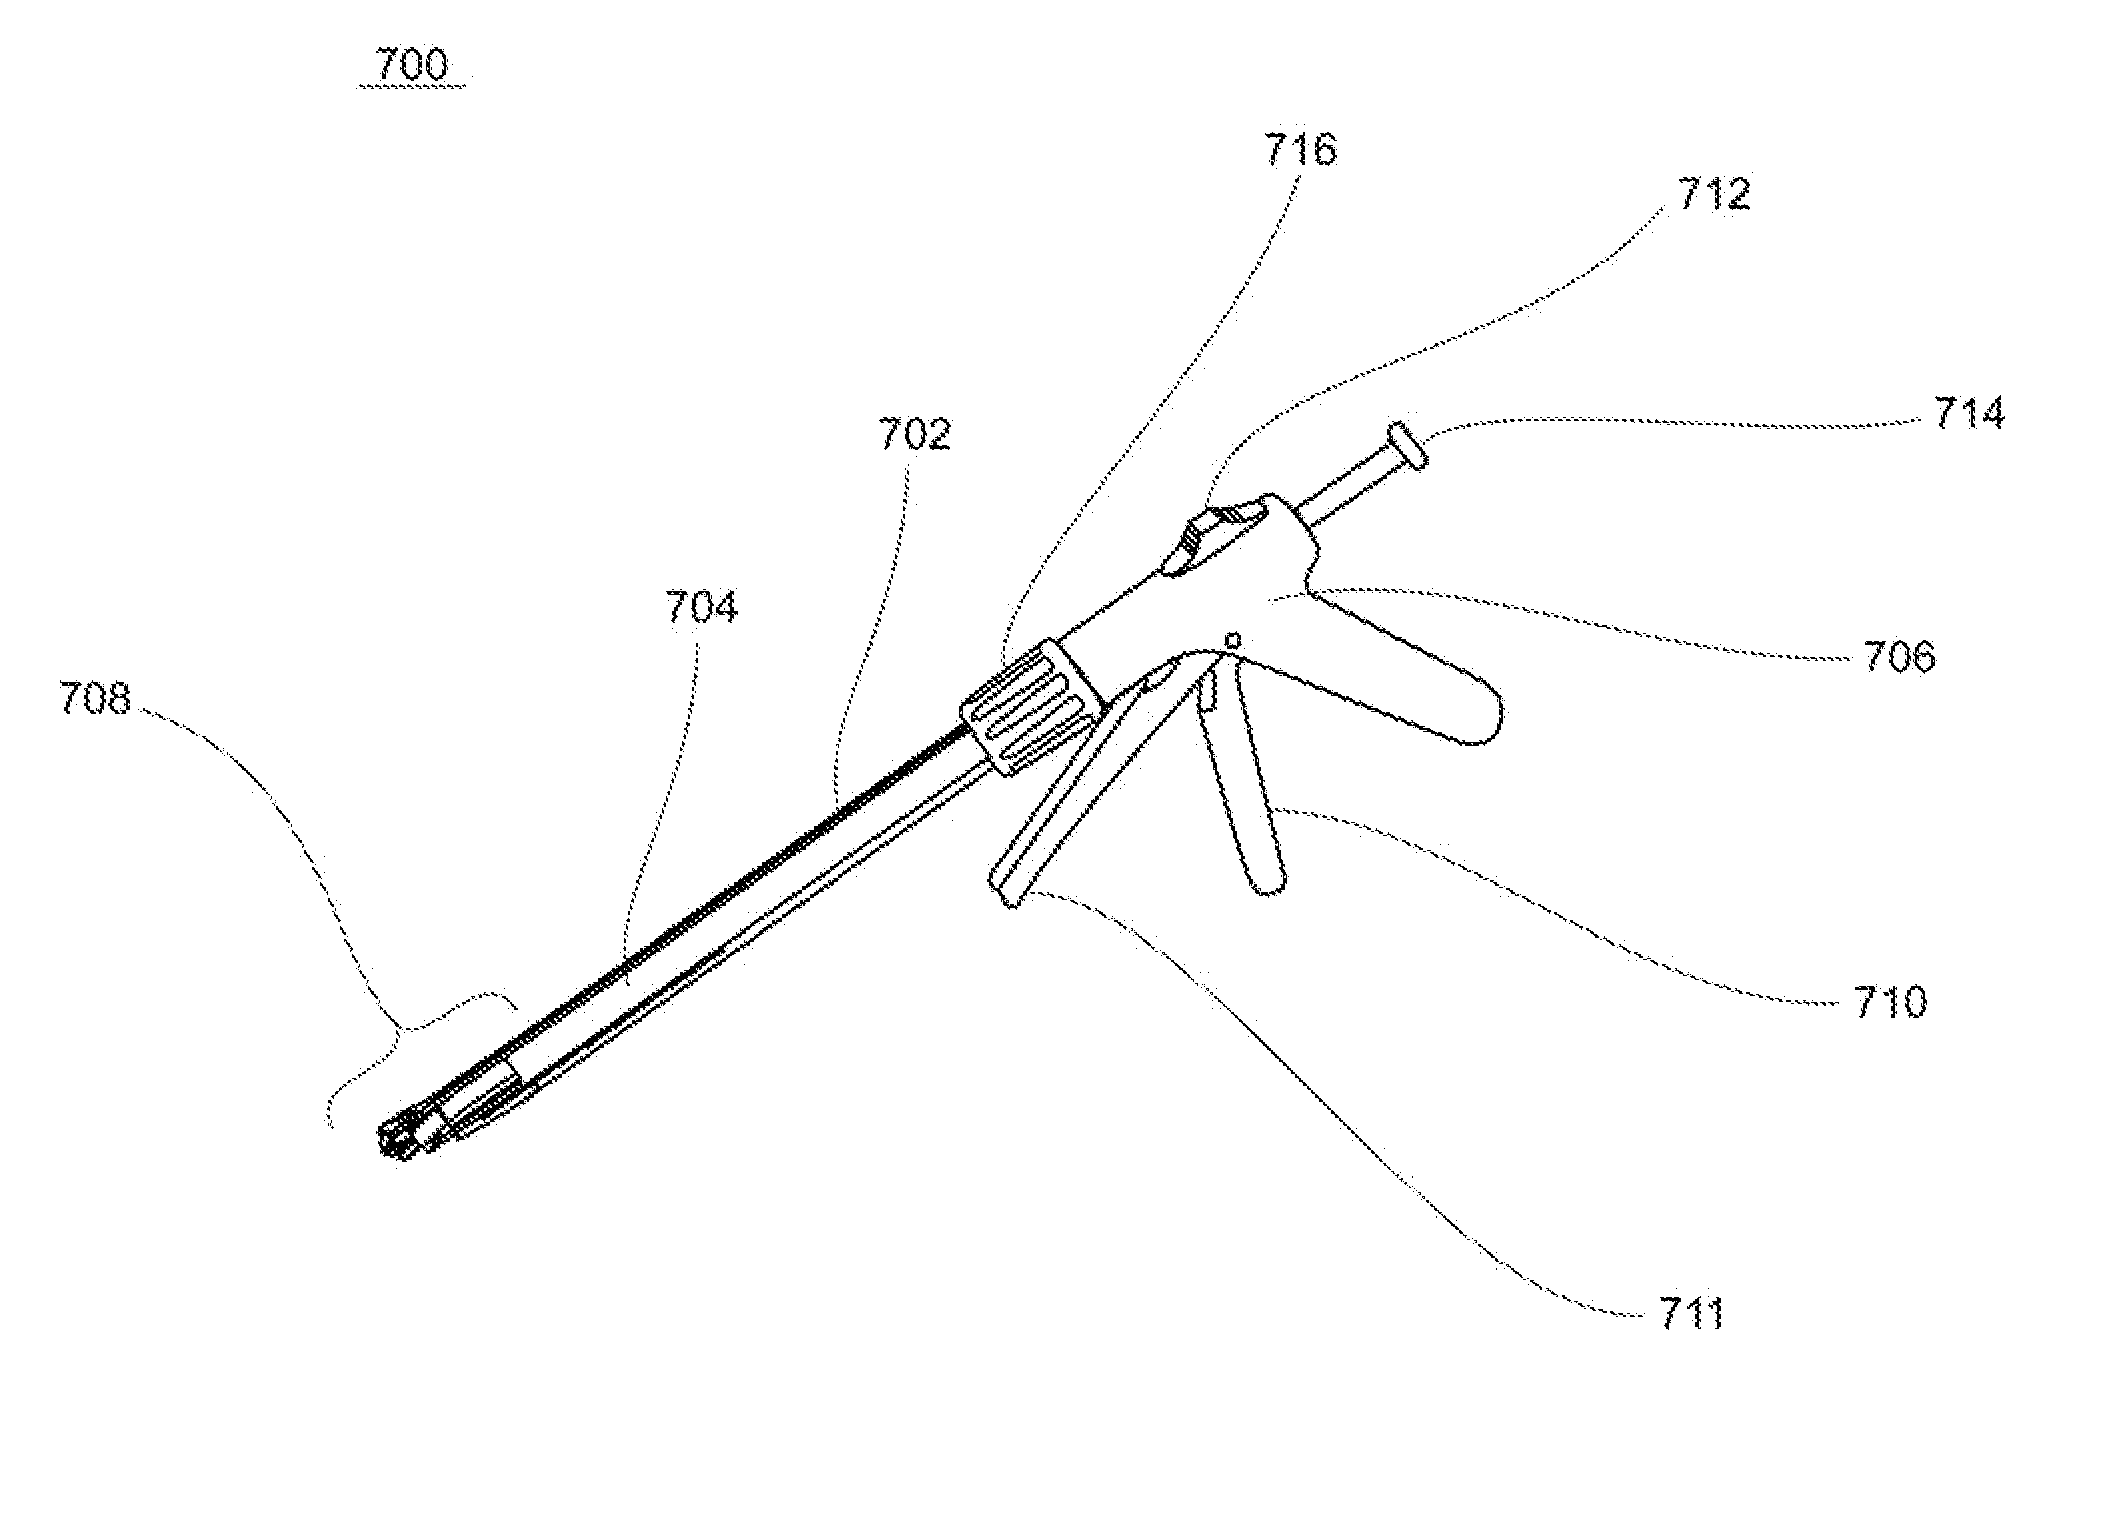 Devices for  reconfiguring a portion of the gastrointestinal tract